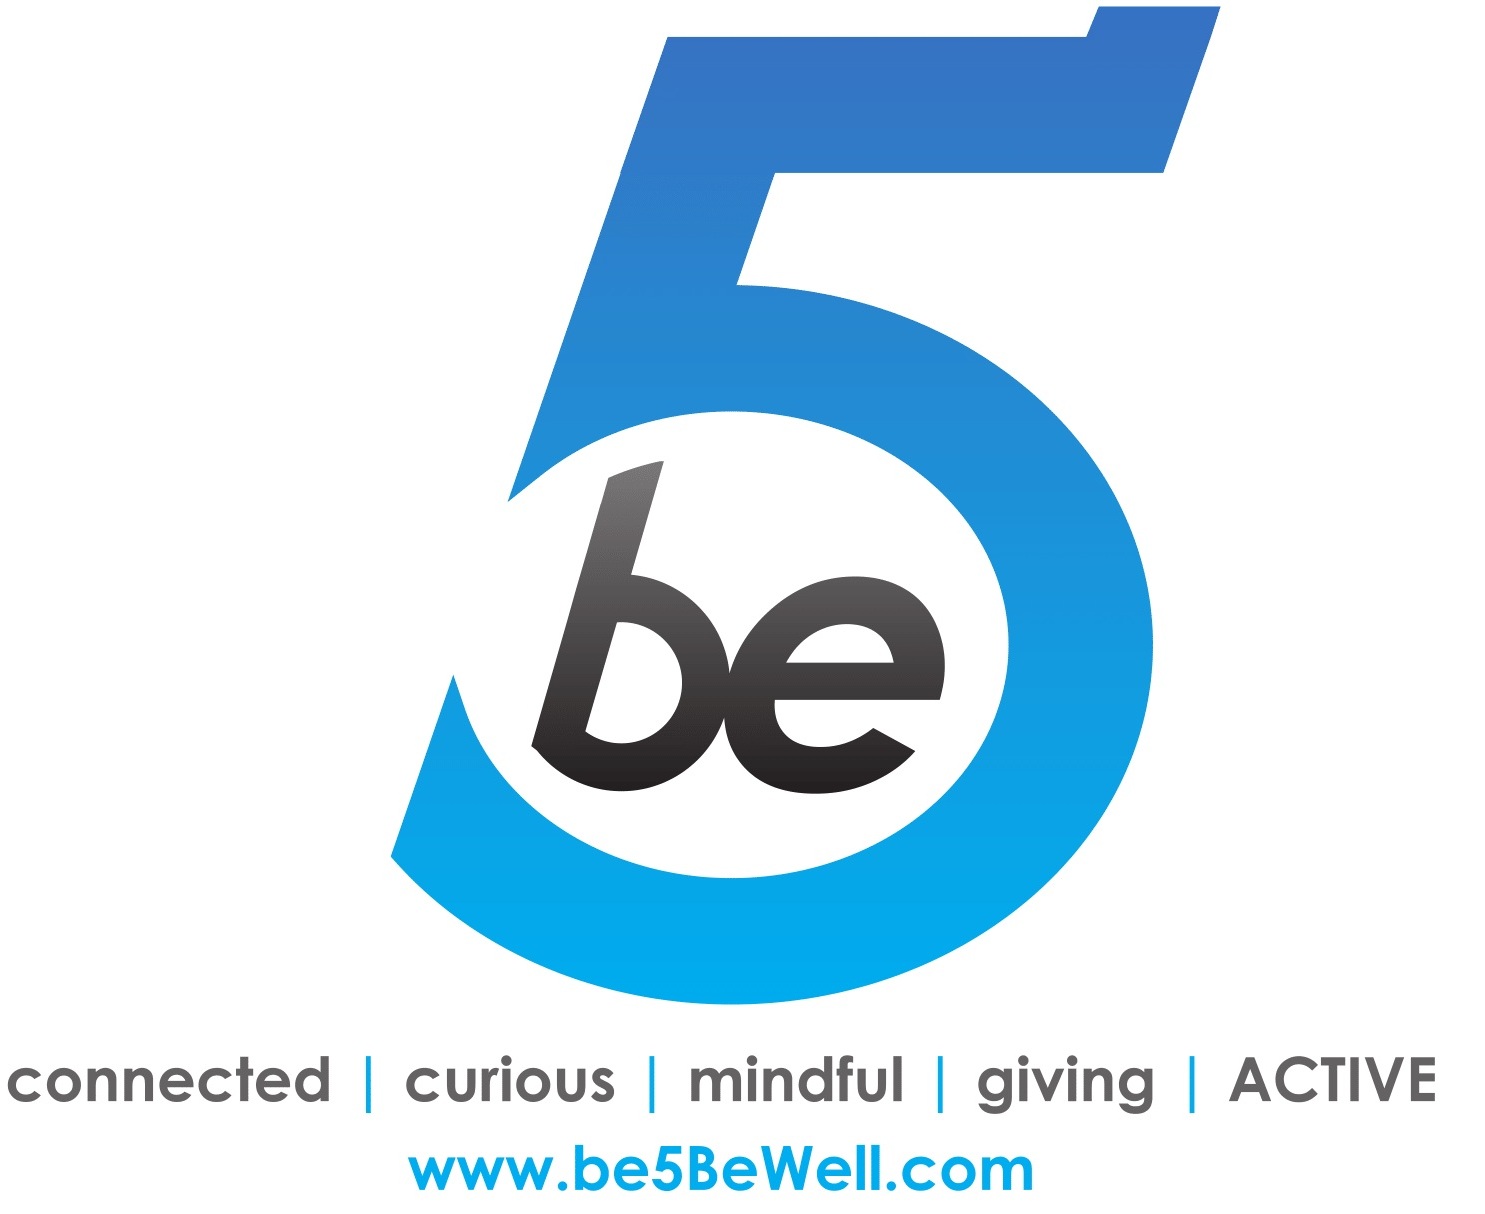 Be 5